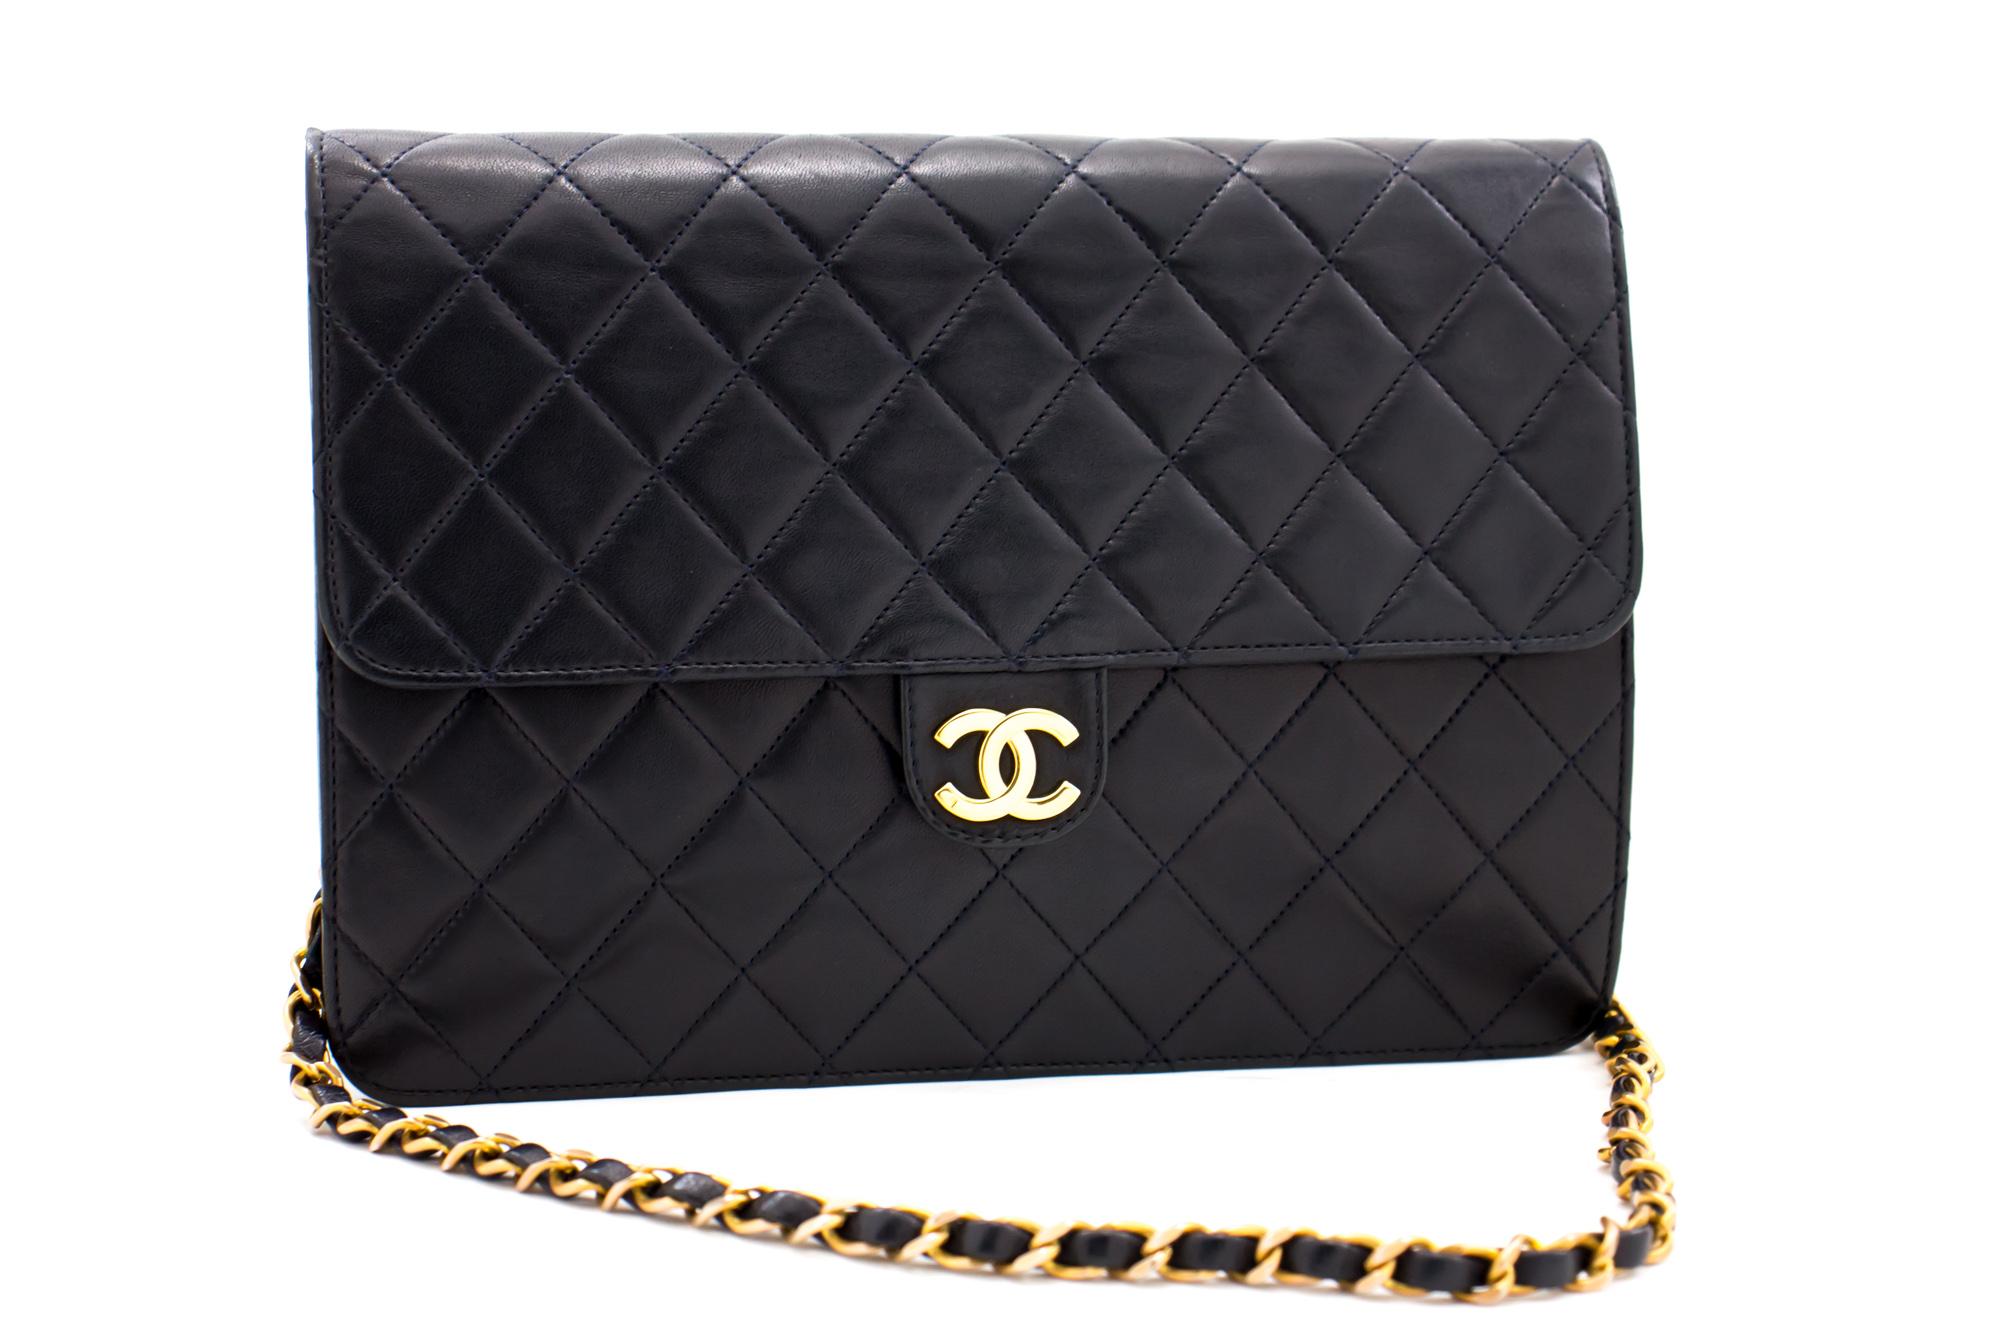 An authentic CHANEL Chain Shoulder Bag Clutch Navy Quilted Flap made of black Lambskin. The color is Navy. The outside material is Leather. The pattern is Solid. This item is Vintage / Classic. The year of manufacture would be 1986-1988.
Conditions